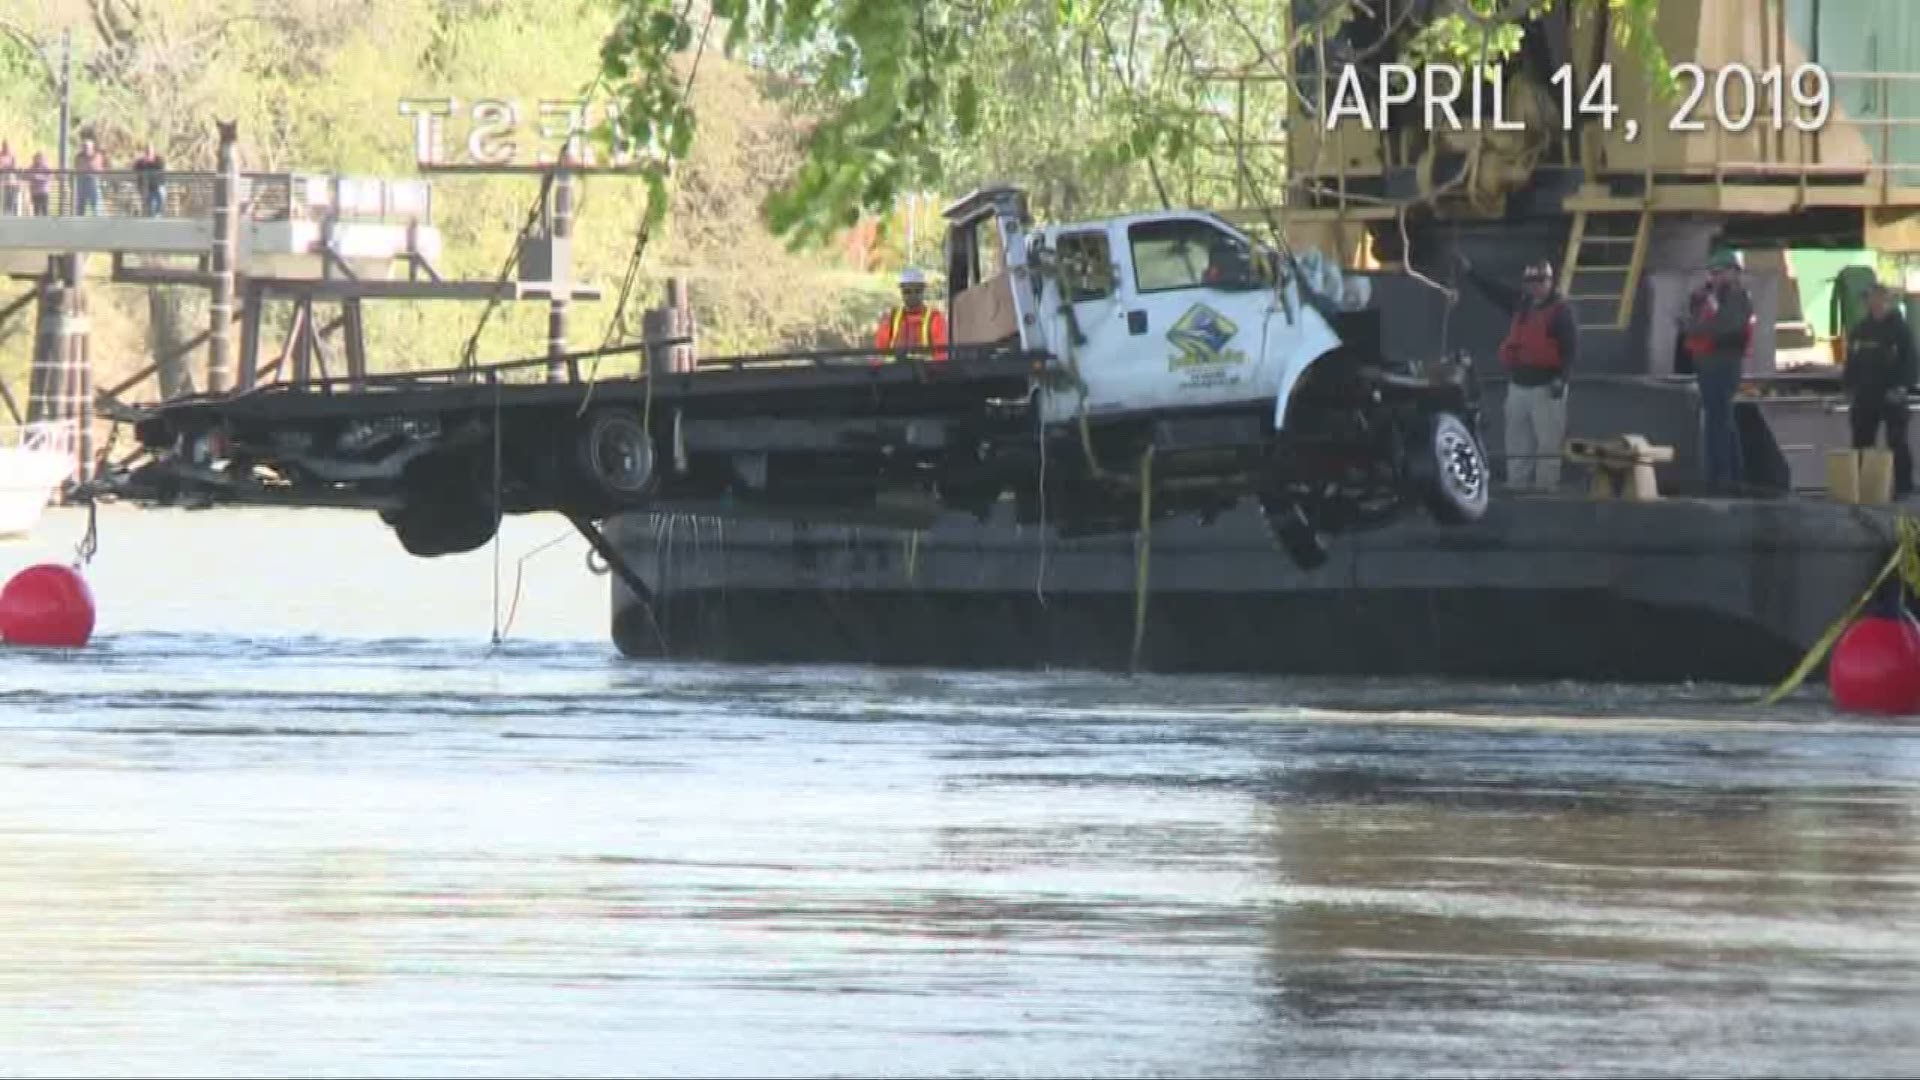 Nineteen days after a big-rig collided with a tow-truck, throwing it and two passengers into the Sacramento river, a private dive team and crew has pulled it from the water.